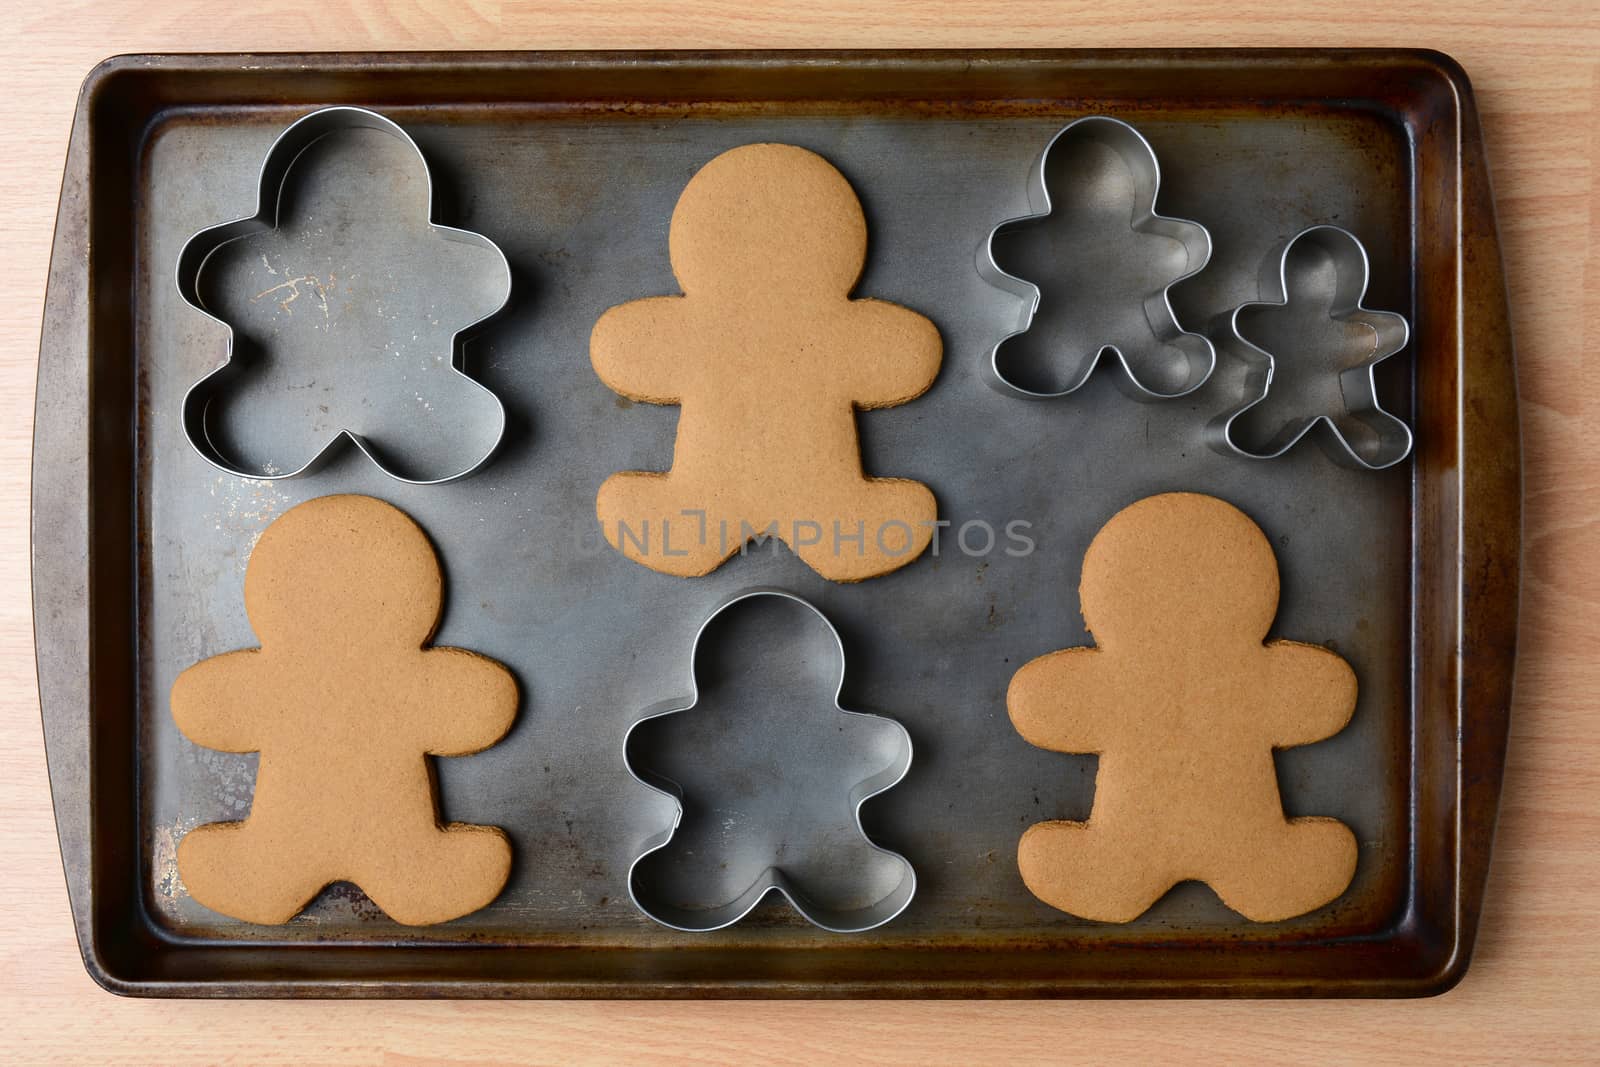 High angle shot of an old baking sheet with Christmas gingerbread man cookies and cookie cutters. Horizontal format on wood kitchen table.